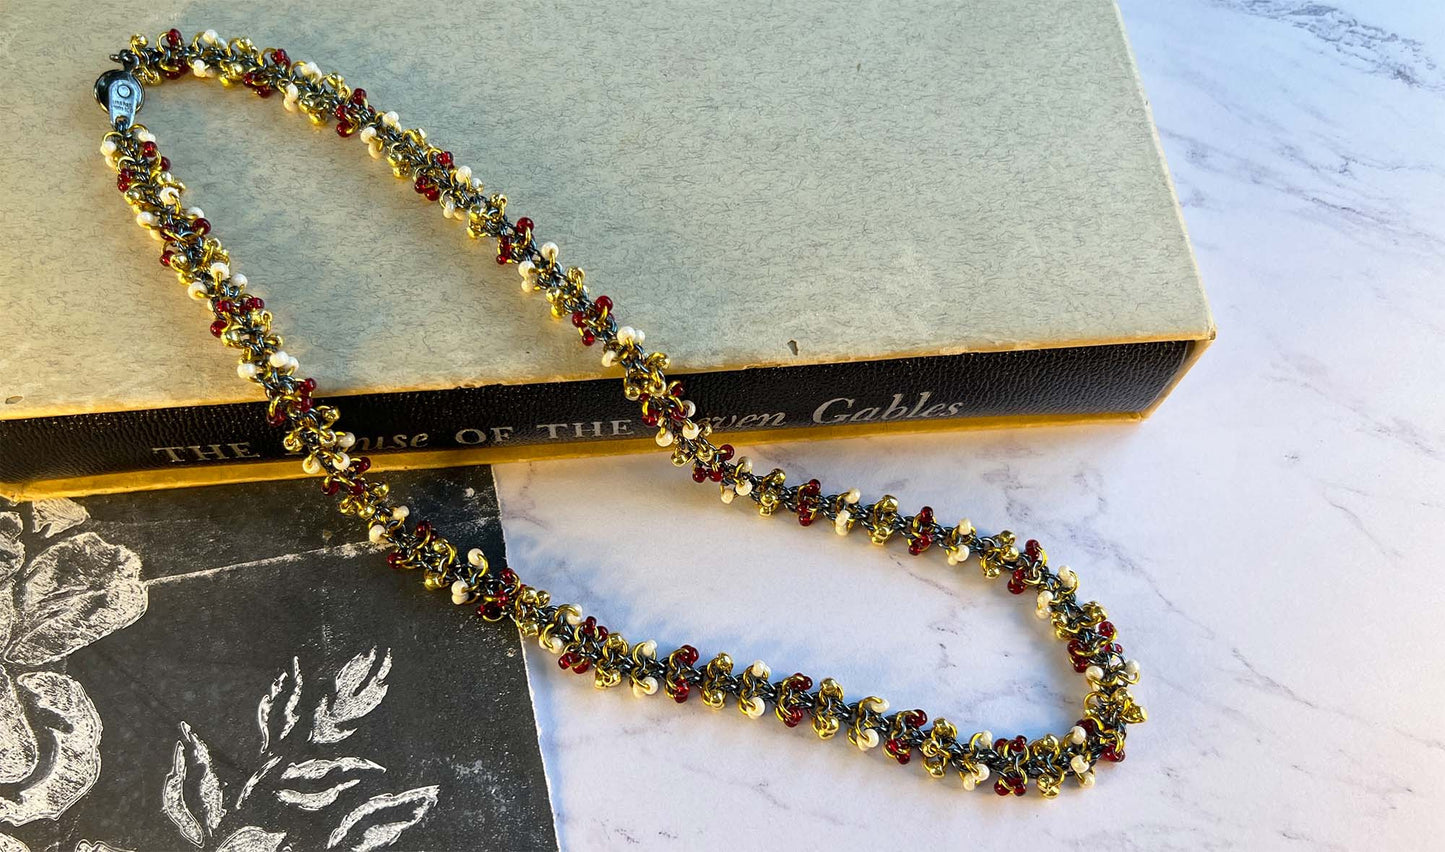 Magus Beaded Chain Necklace Kit with Video Class - Gunmetal Gold Starlight Garnet and Eggshell